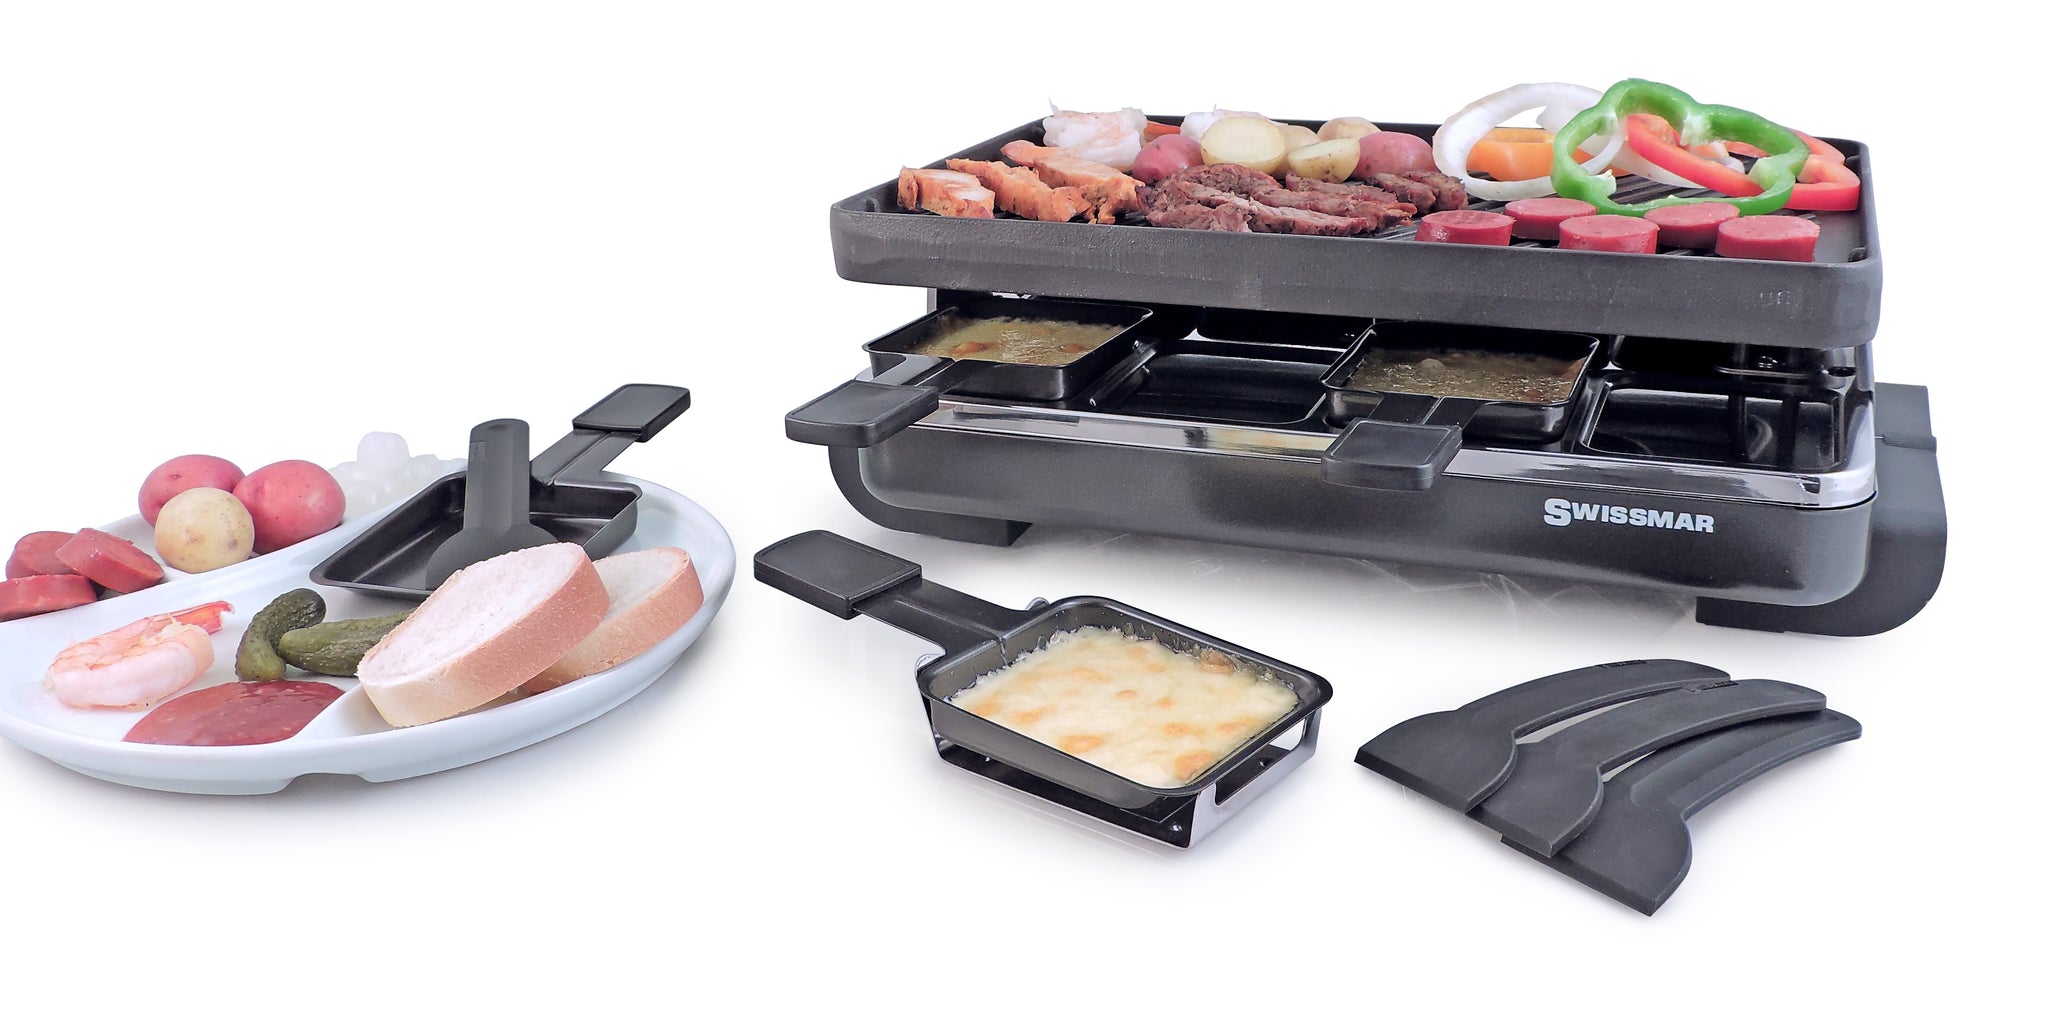 Swissmar Black Anthracite Raclette Party Grill with Reversible Cast Iron Grill Plate